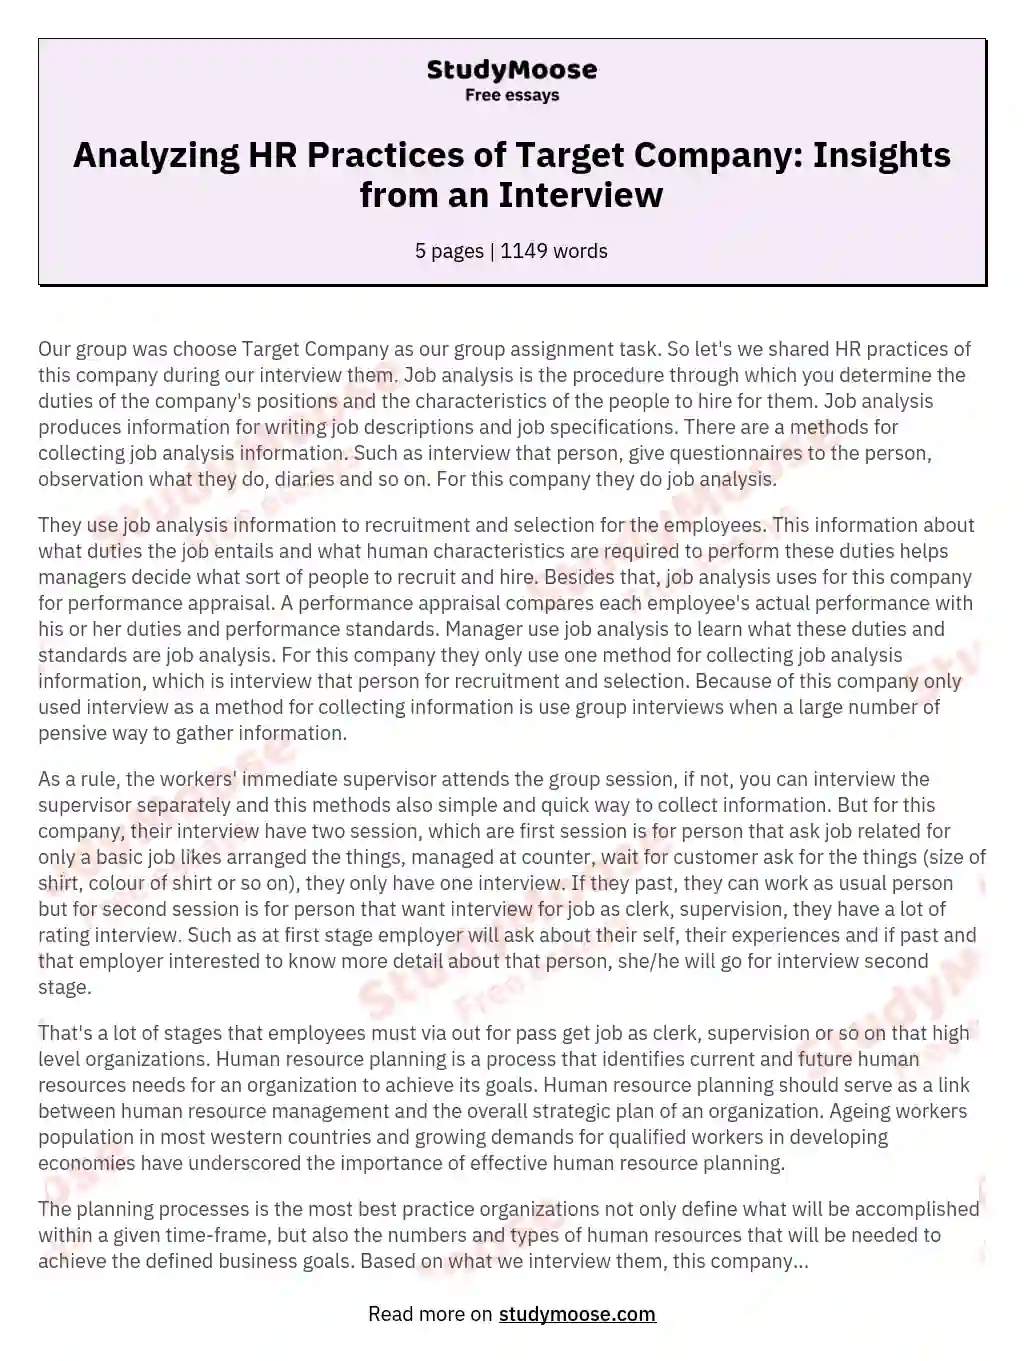 Analyzing HR Practices of Target Company: Insights from an Interview essay